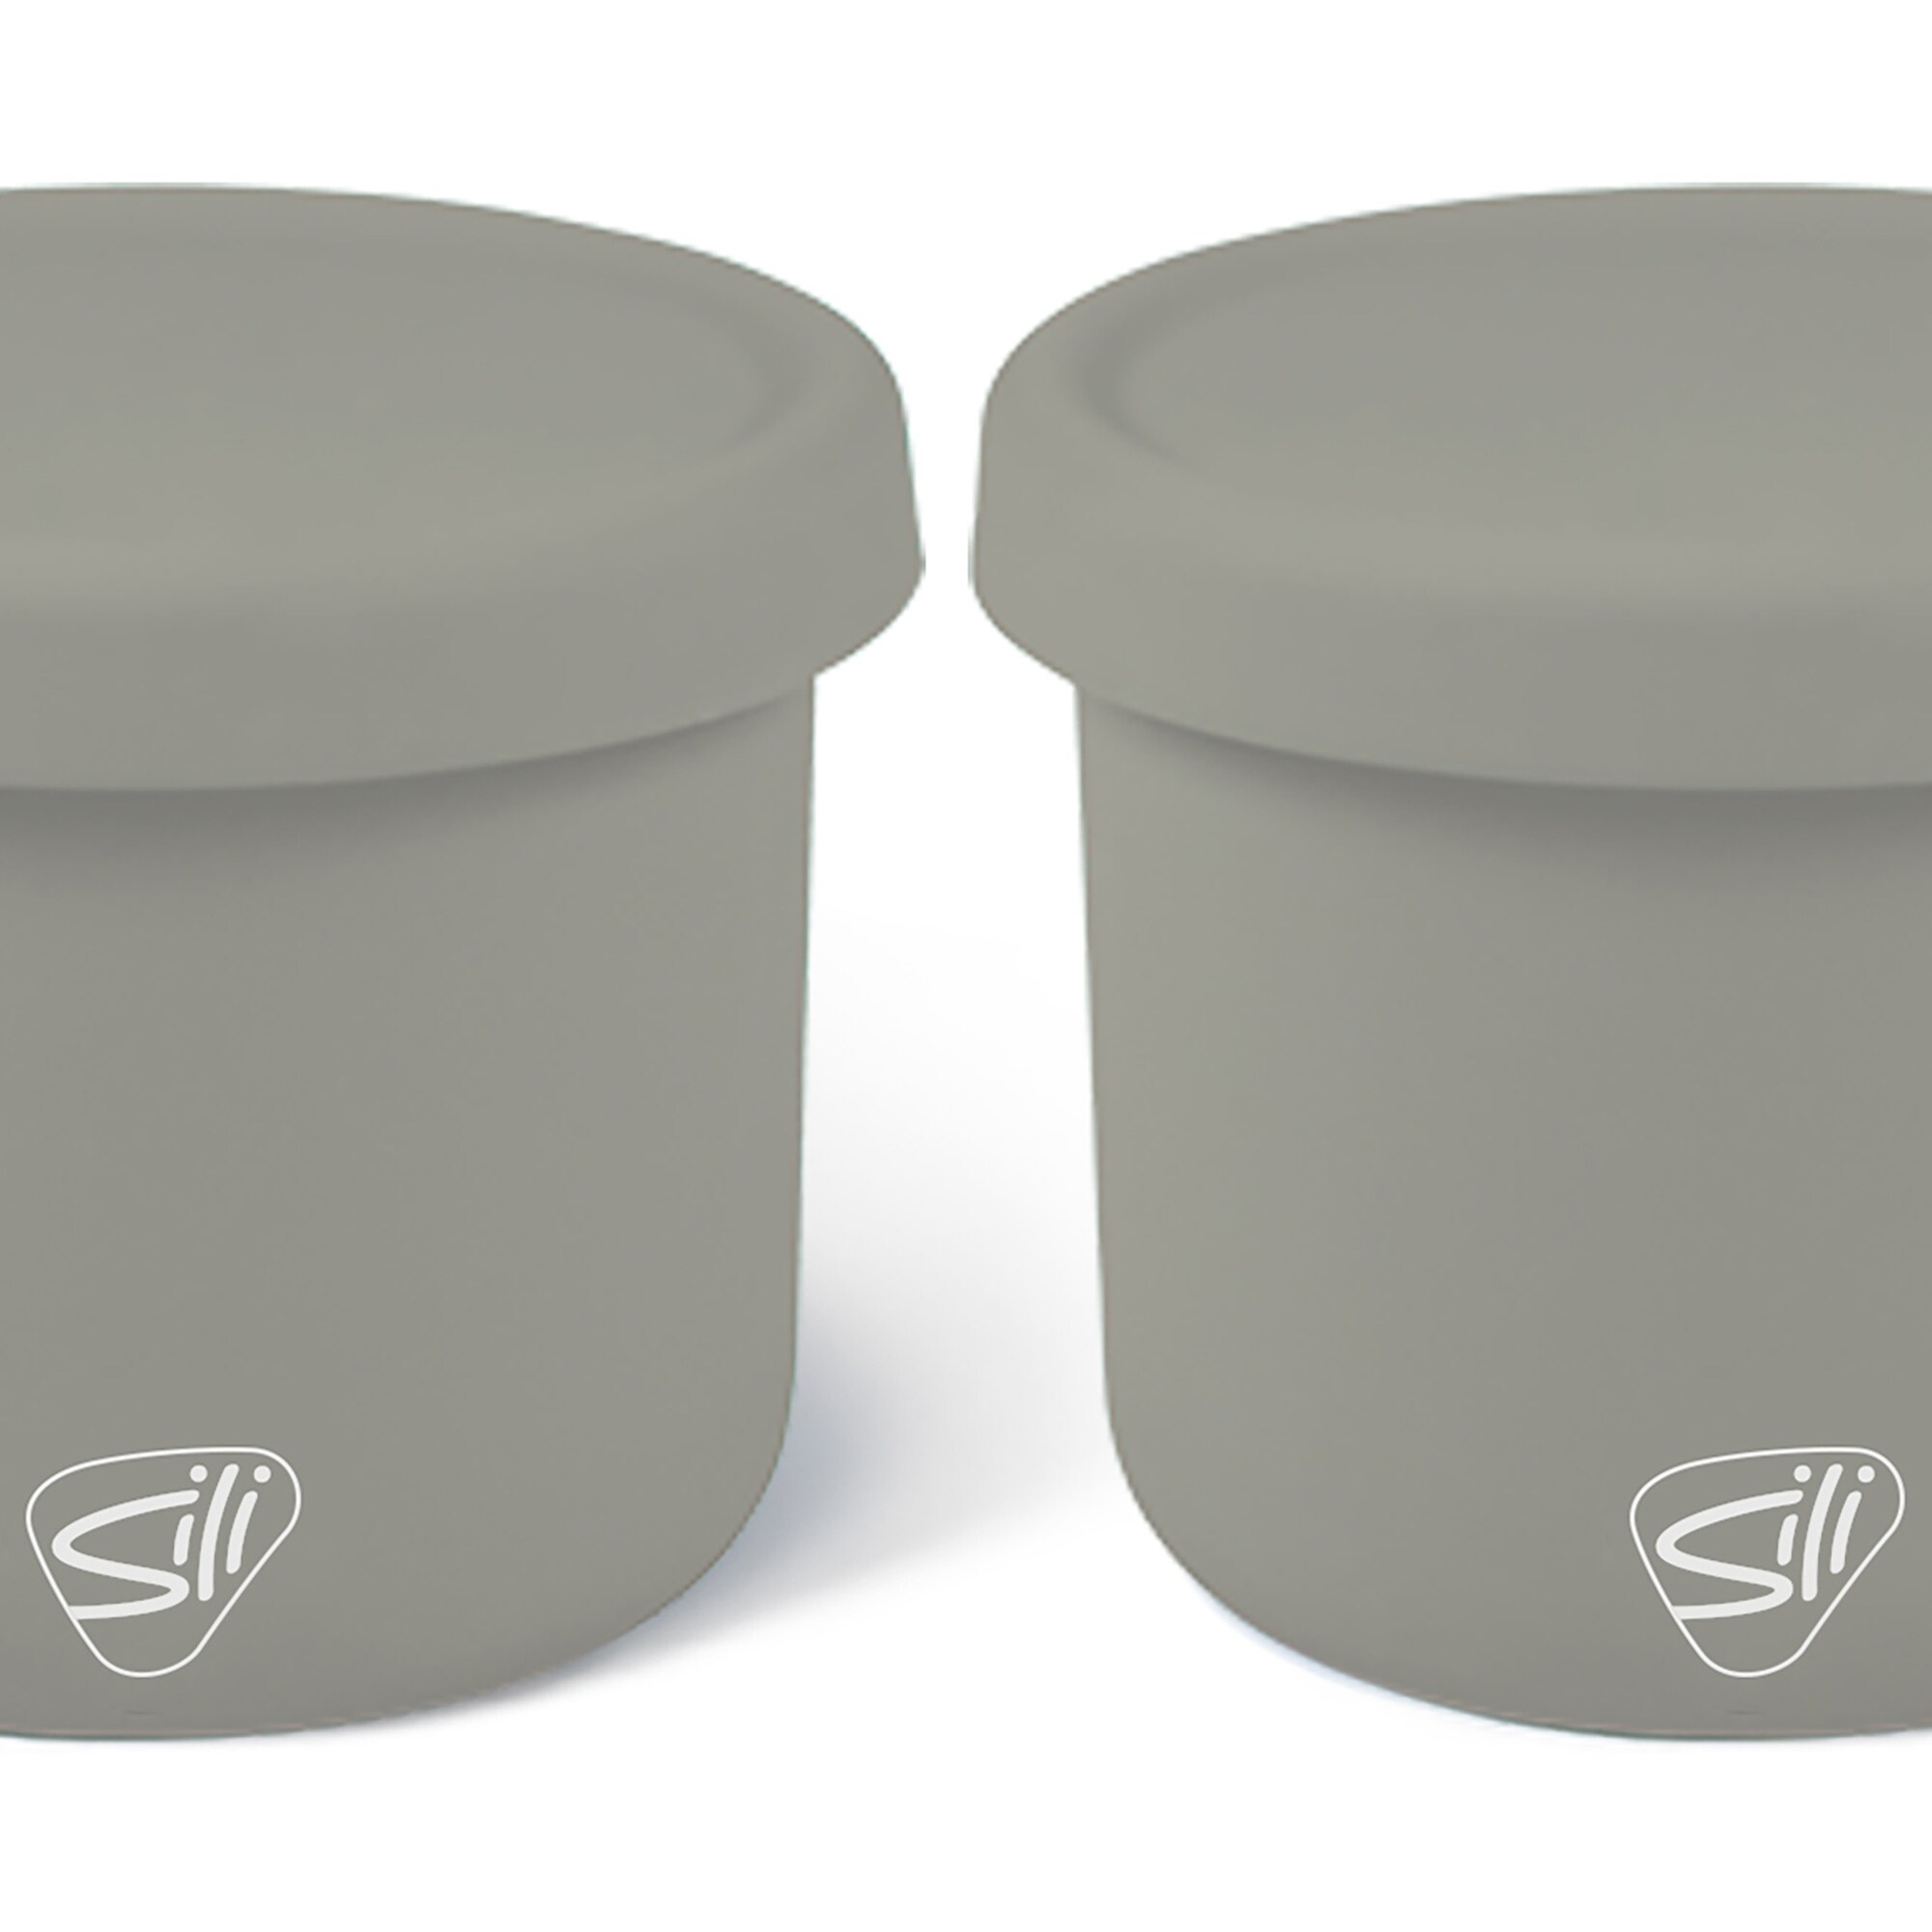 Silipint: Silicone 10oz Lidded Bowls: 2 Pack Moonstone - Unbreakable, Flexible, Microwave-Oven-Dishwasher, Non-Slip - Multi